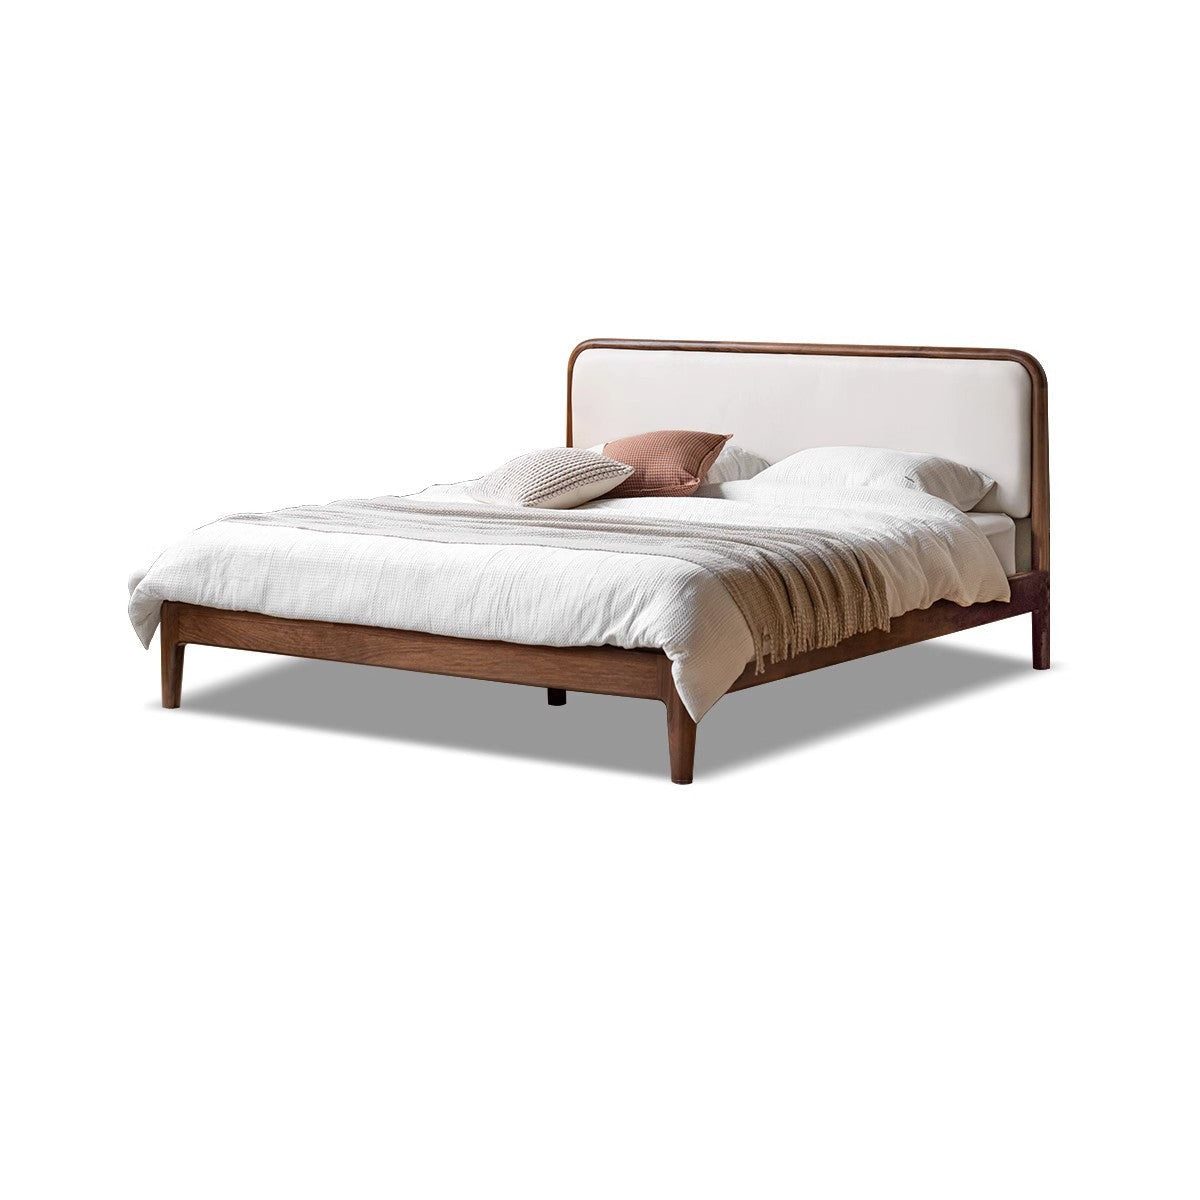 Cowhide leather,technical cloth Black Walnut,Cherry wood Bed_)